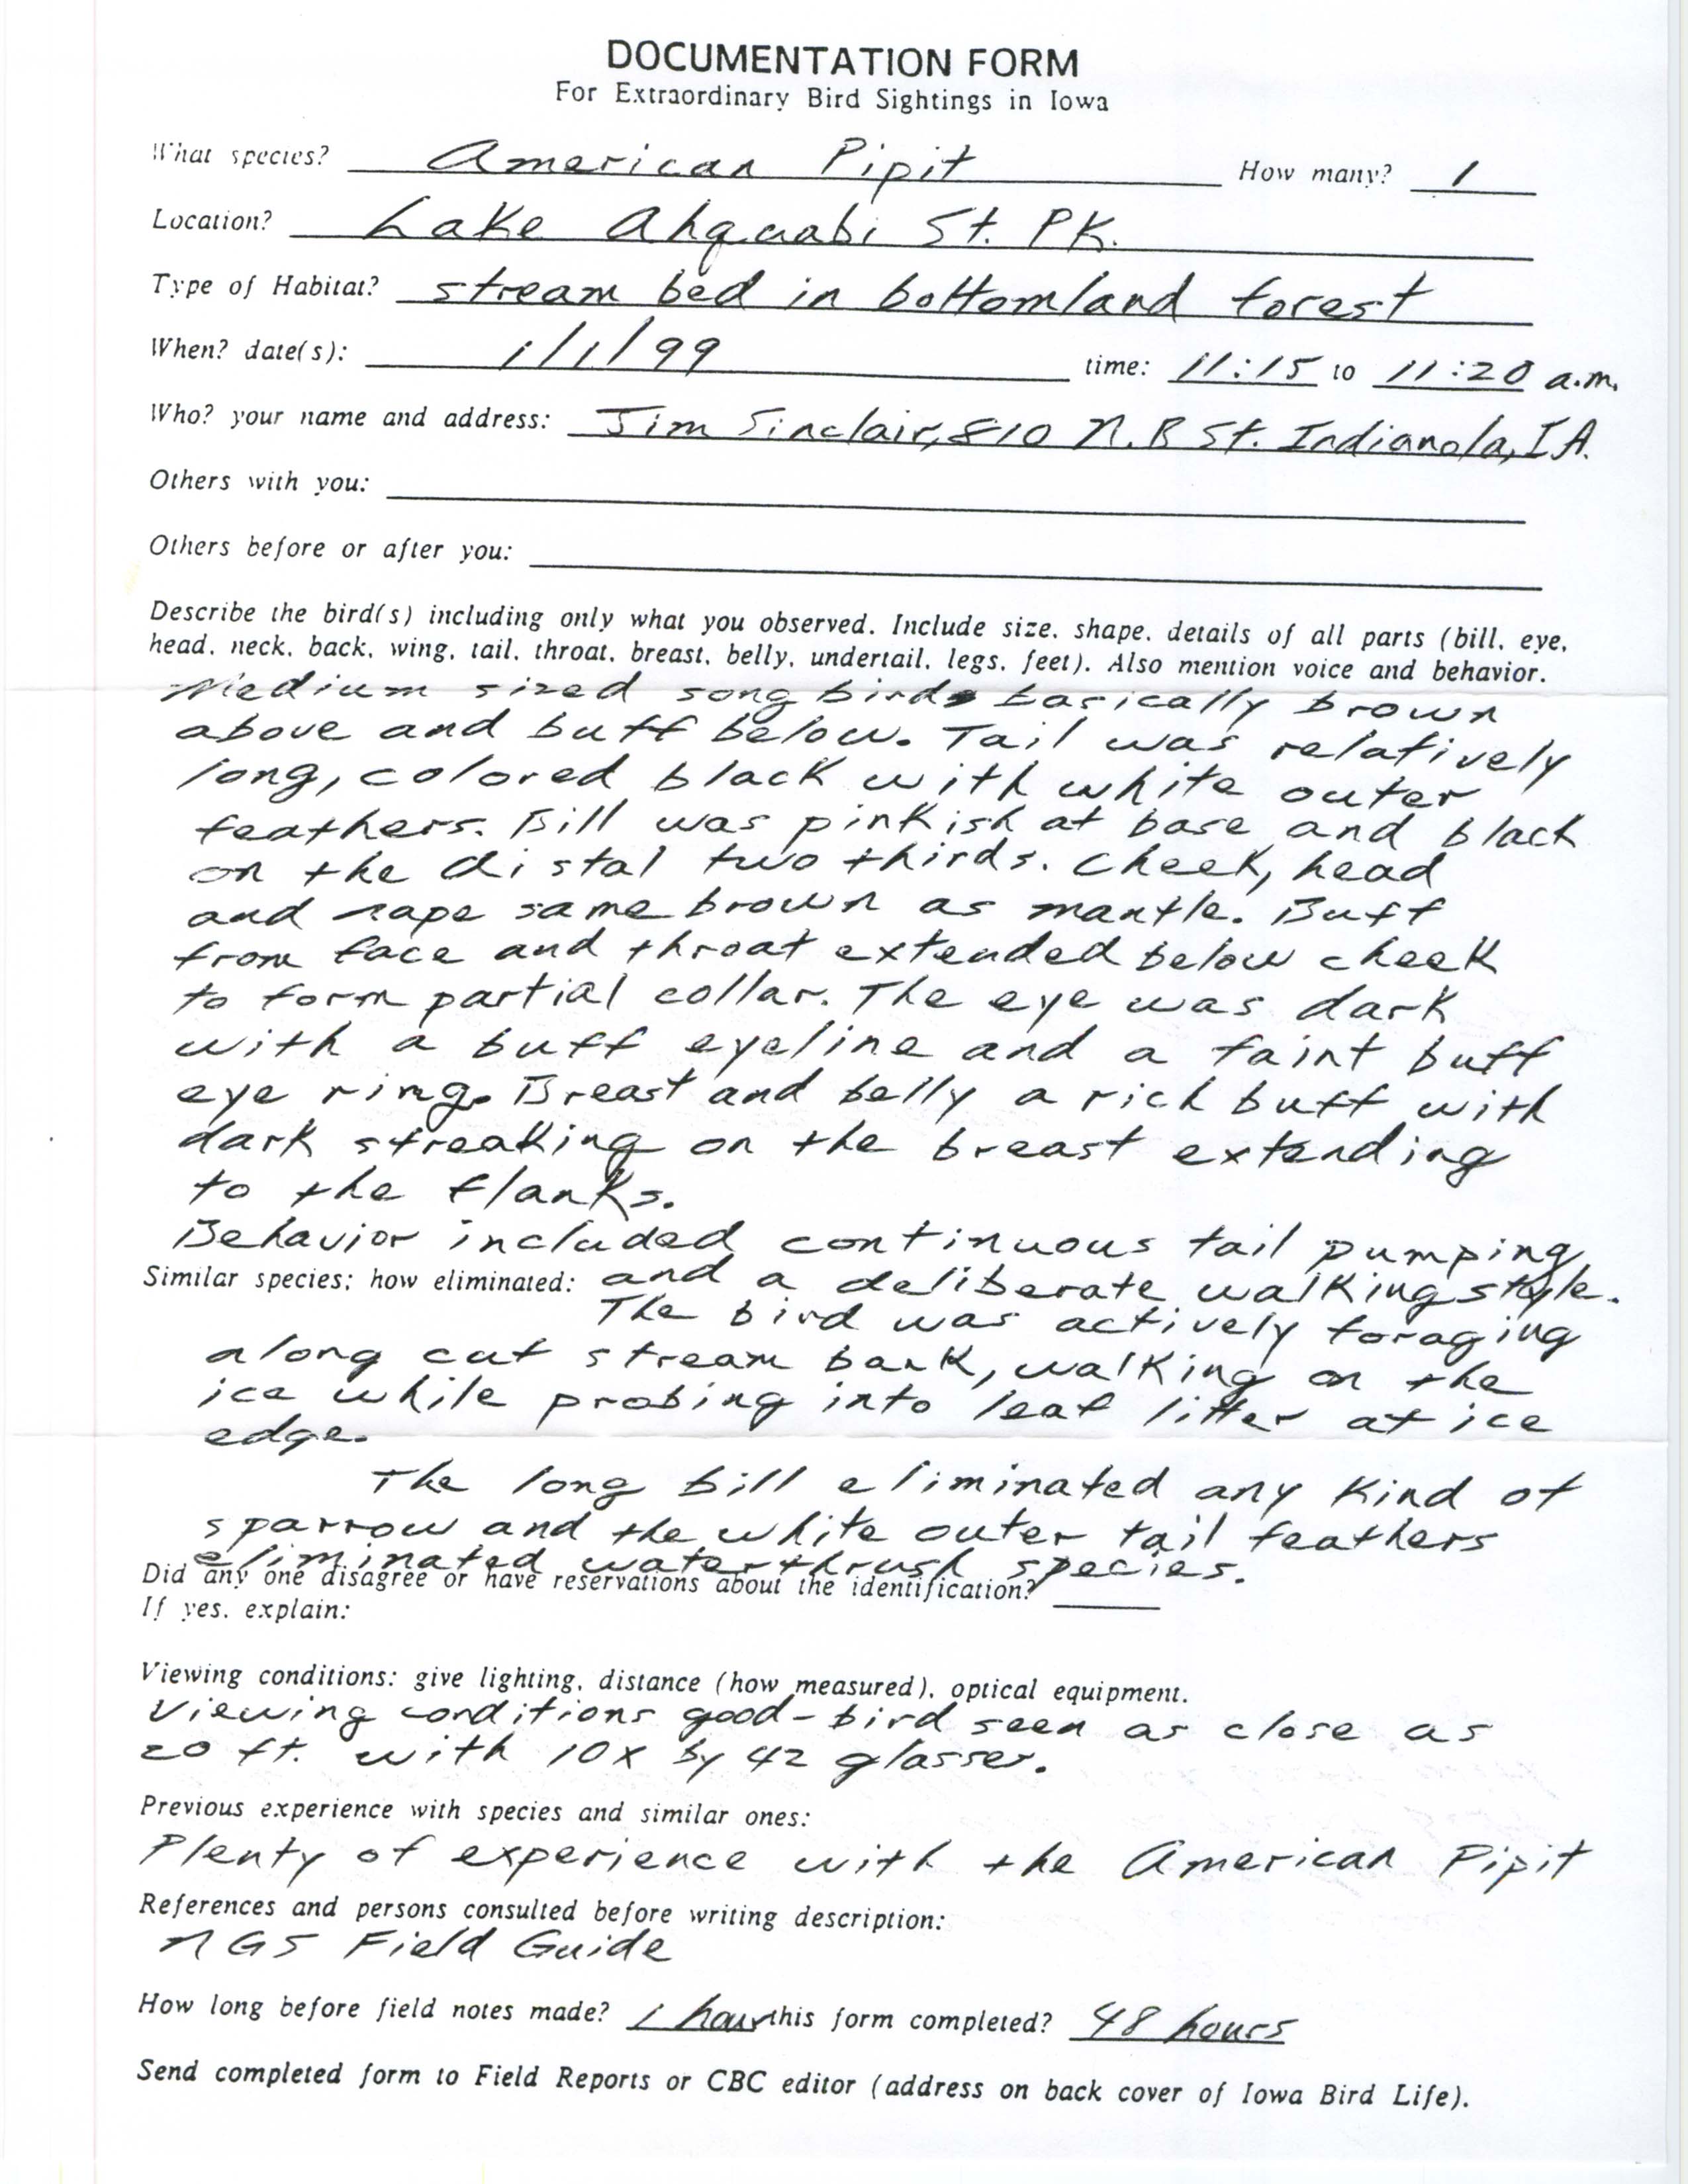 Rare bird documentation form for American Pipit at Lake Ahquabi State Park, 1999